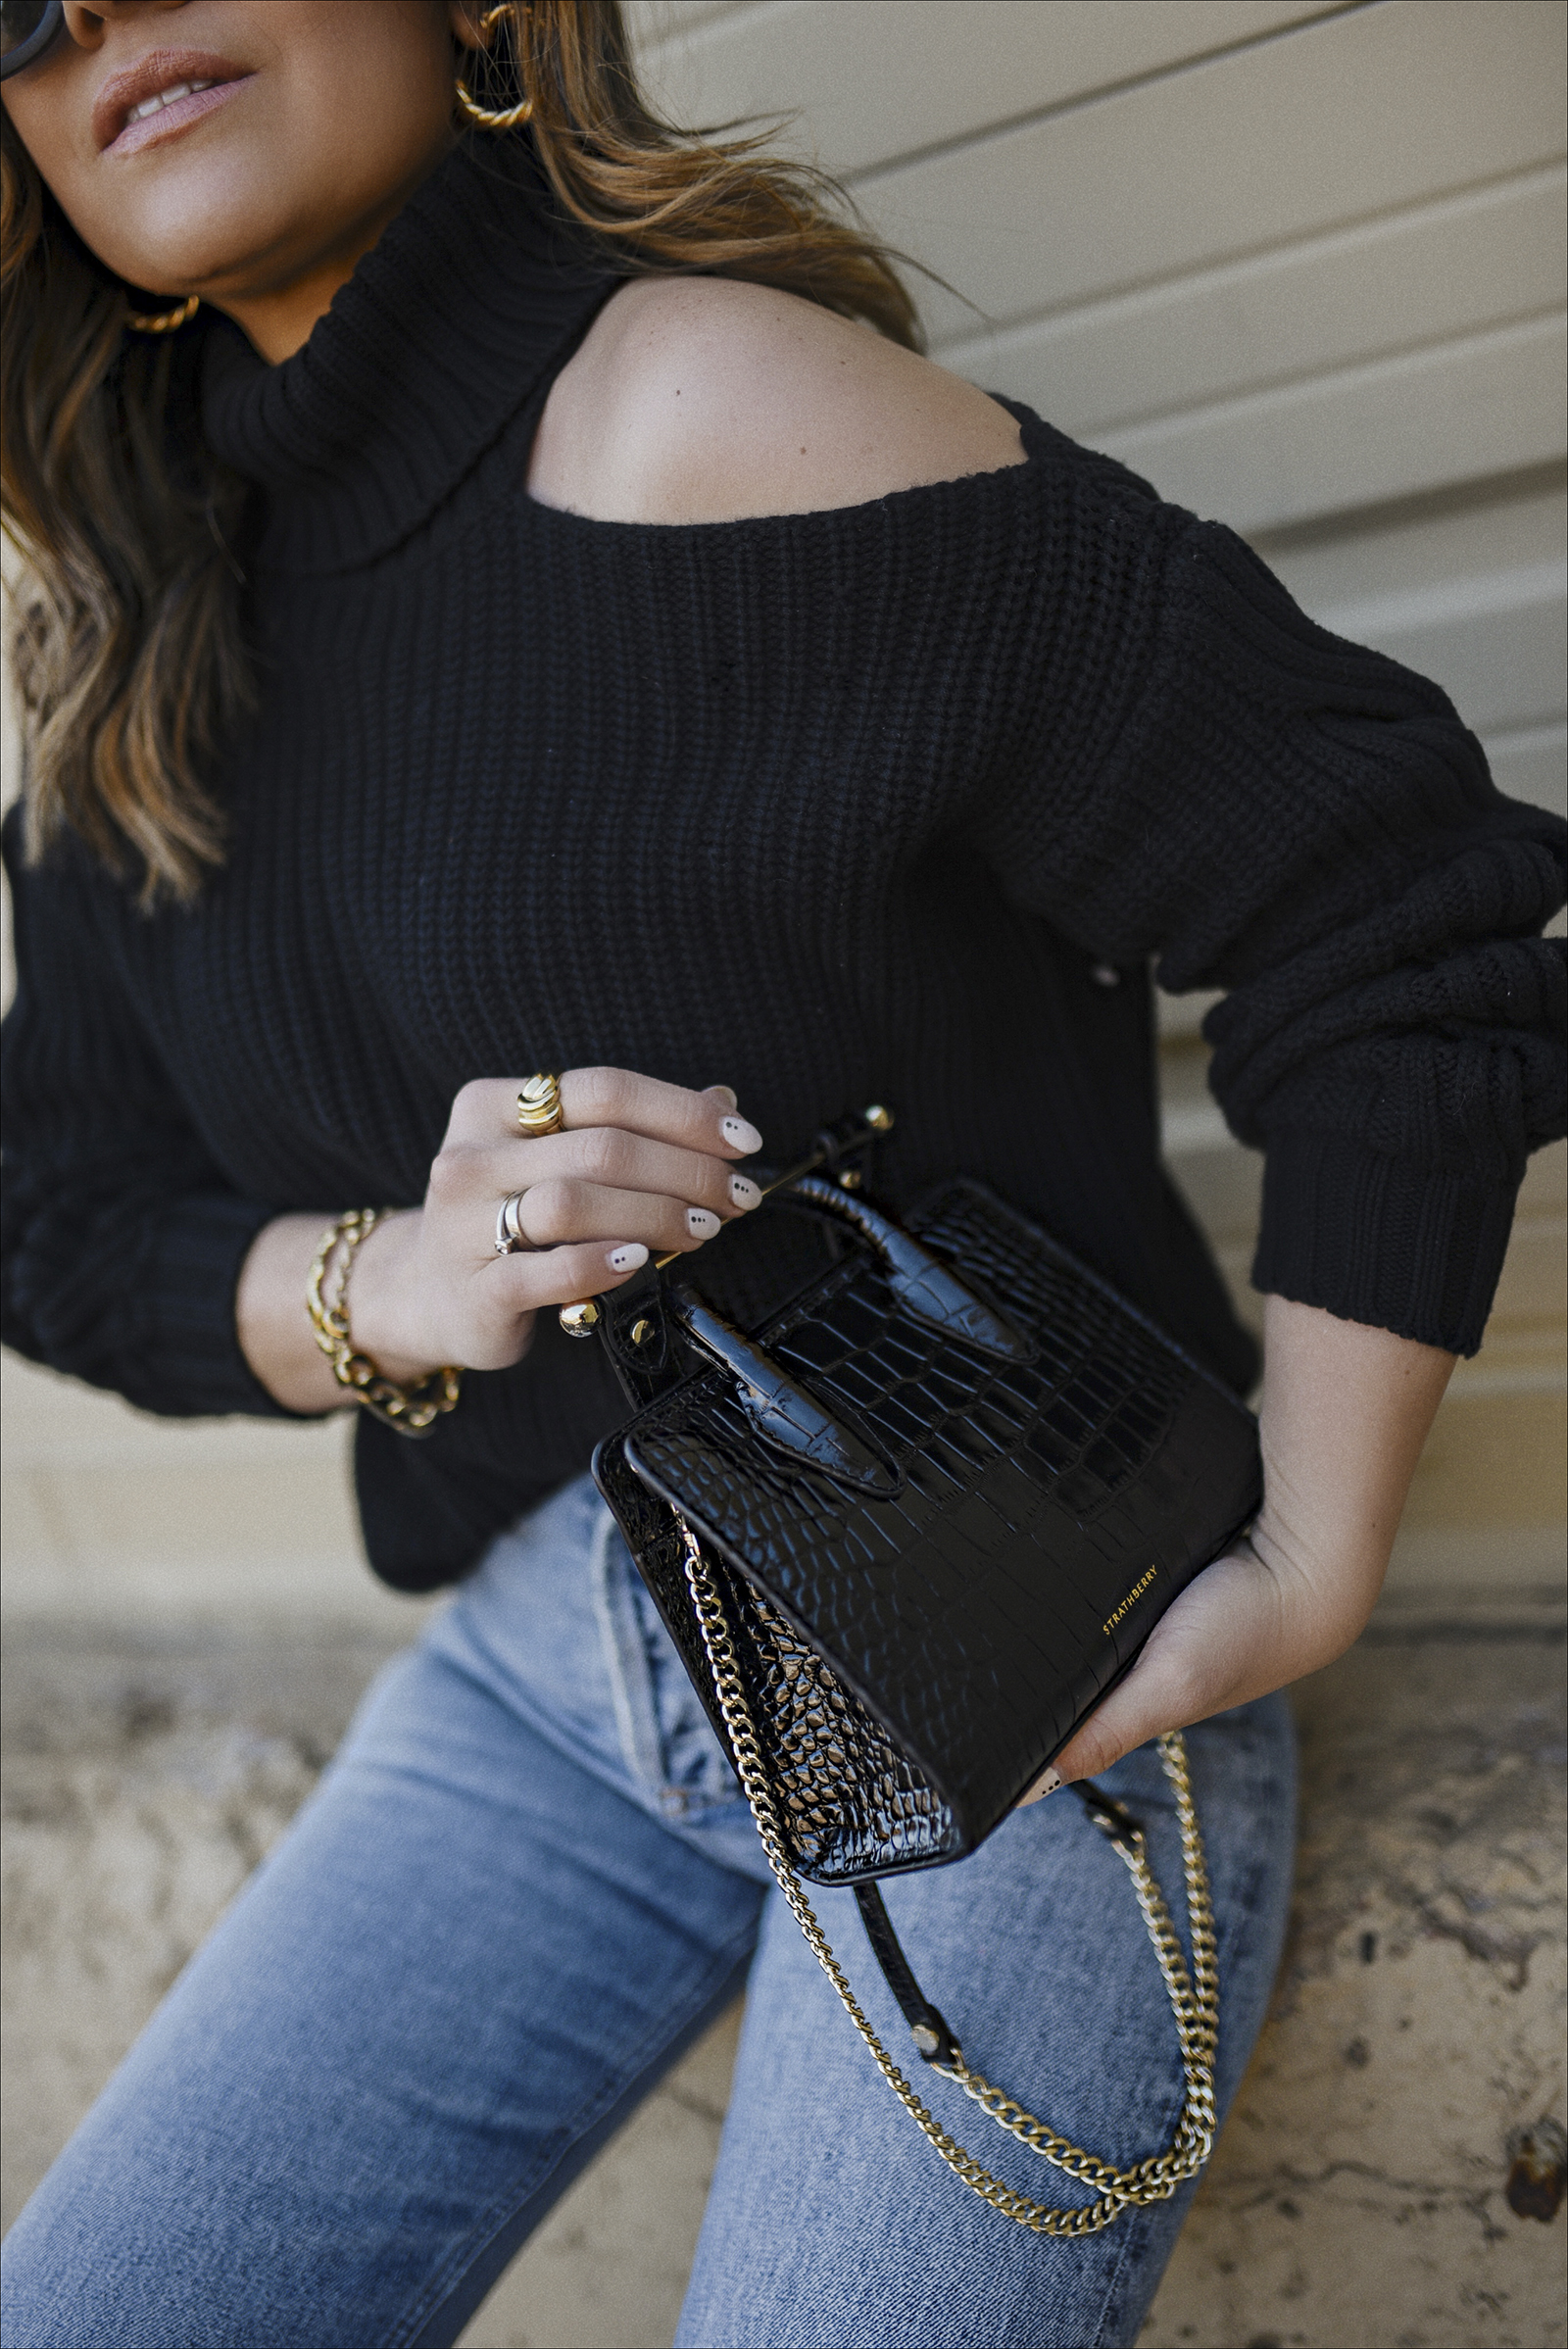 Carolina Hellal of Chic Talk wearing a cutout knit sweater and agolde jeans via Bloomingdales. Black Converse and strathberry bag